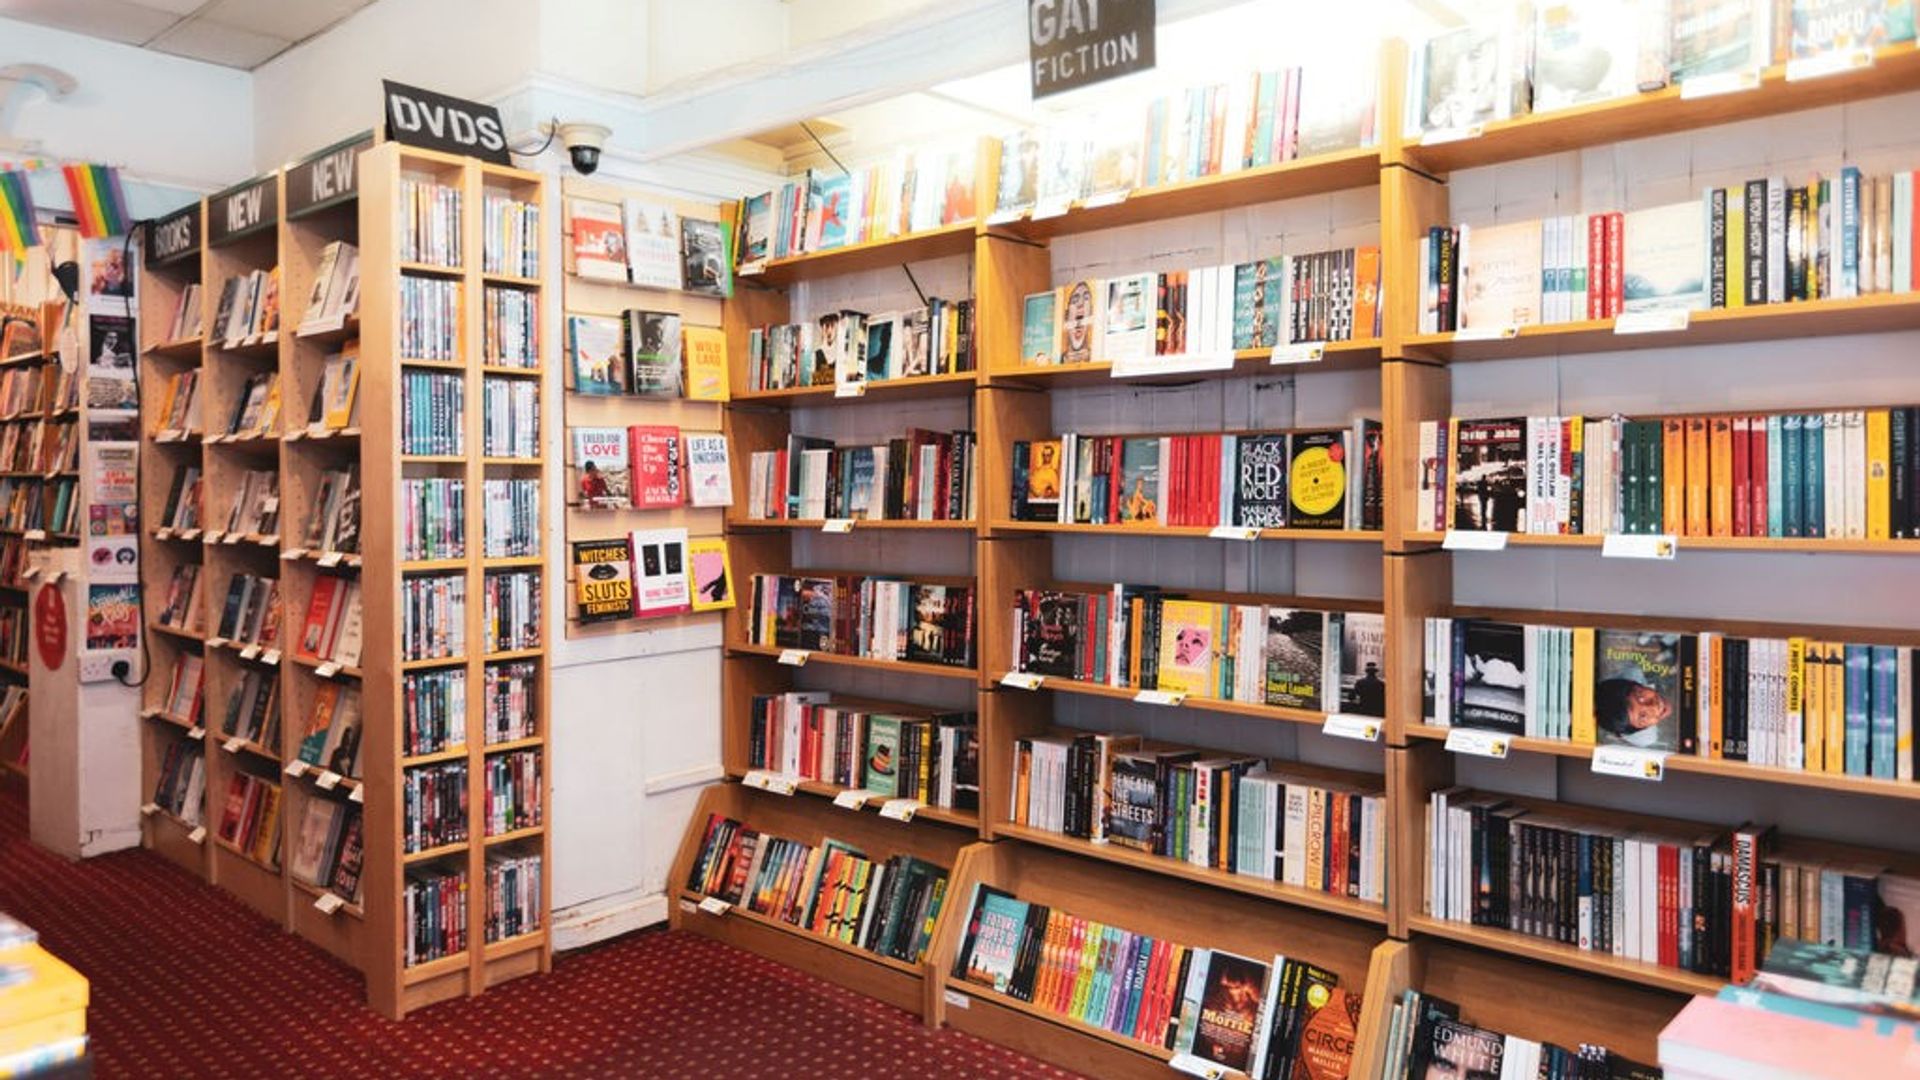 9 of the best LGBTQ+ book stores to fill your shelves with some queer joy